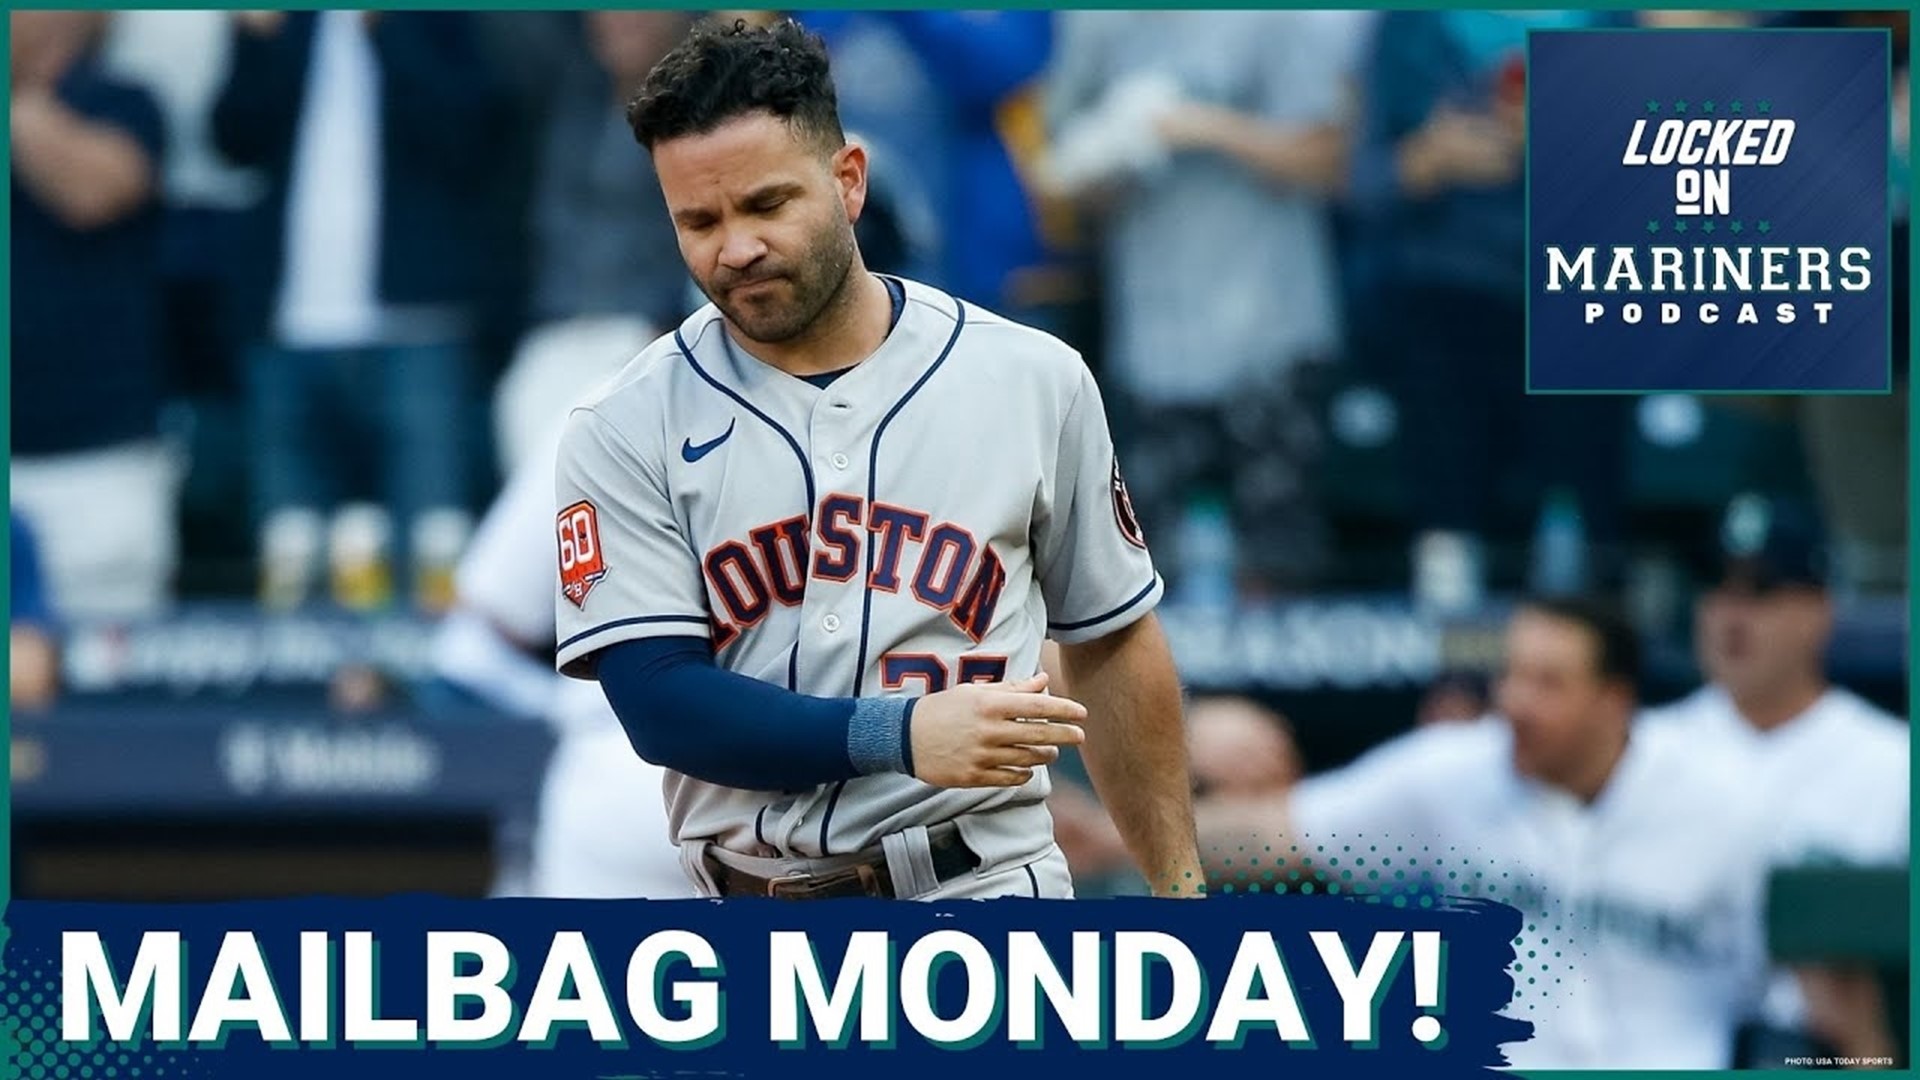 A new week means it's time for a new Mariners Mailbag Monday! On today's episode, Colby and Ty discuss topics including Jose Altuve's injury.